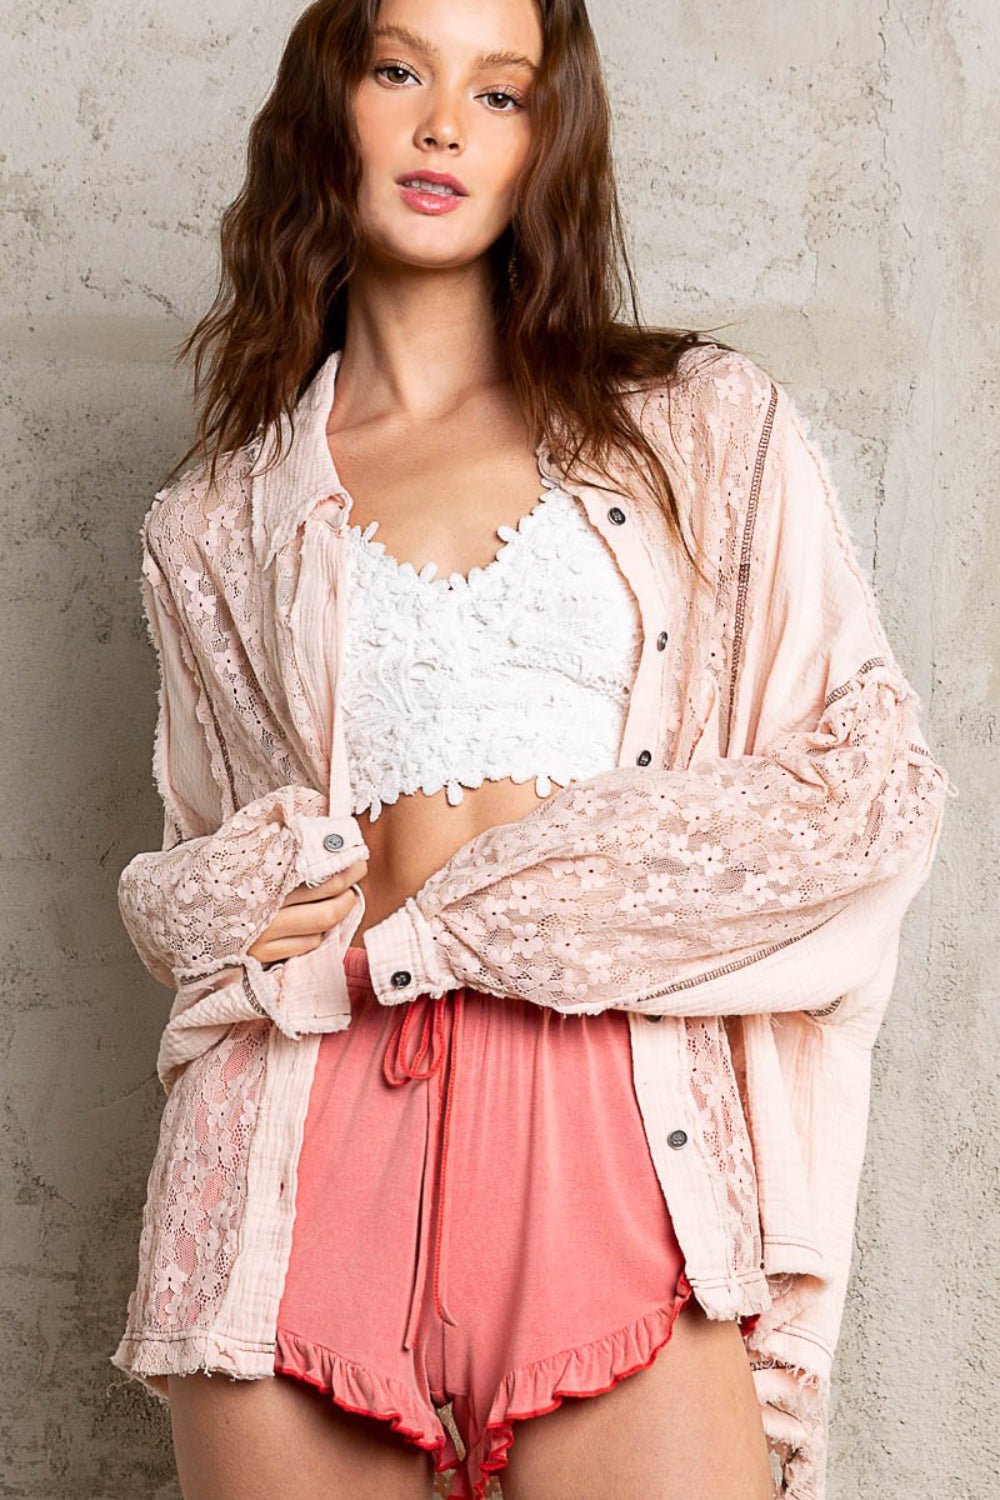 Oversized Lace Button-Down Shirt in Baby PinkShirtPOL